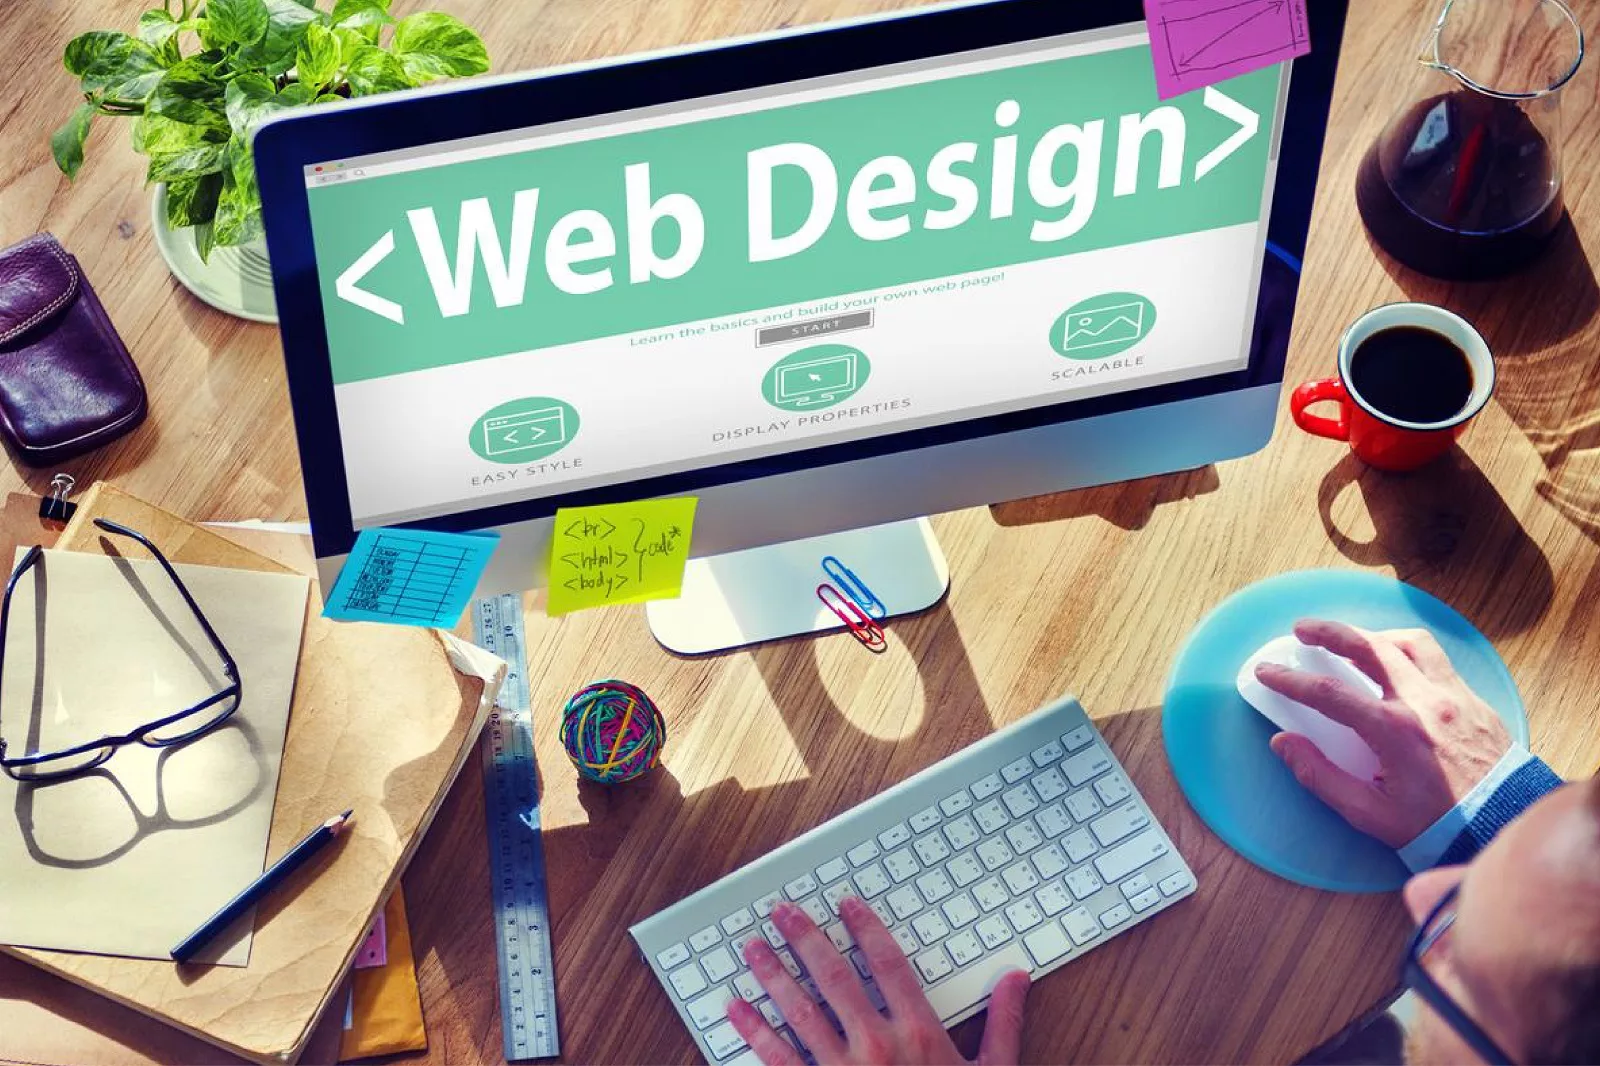 Elevating Web Design with Engaging Content